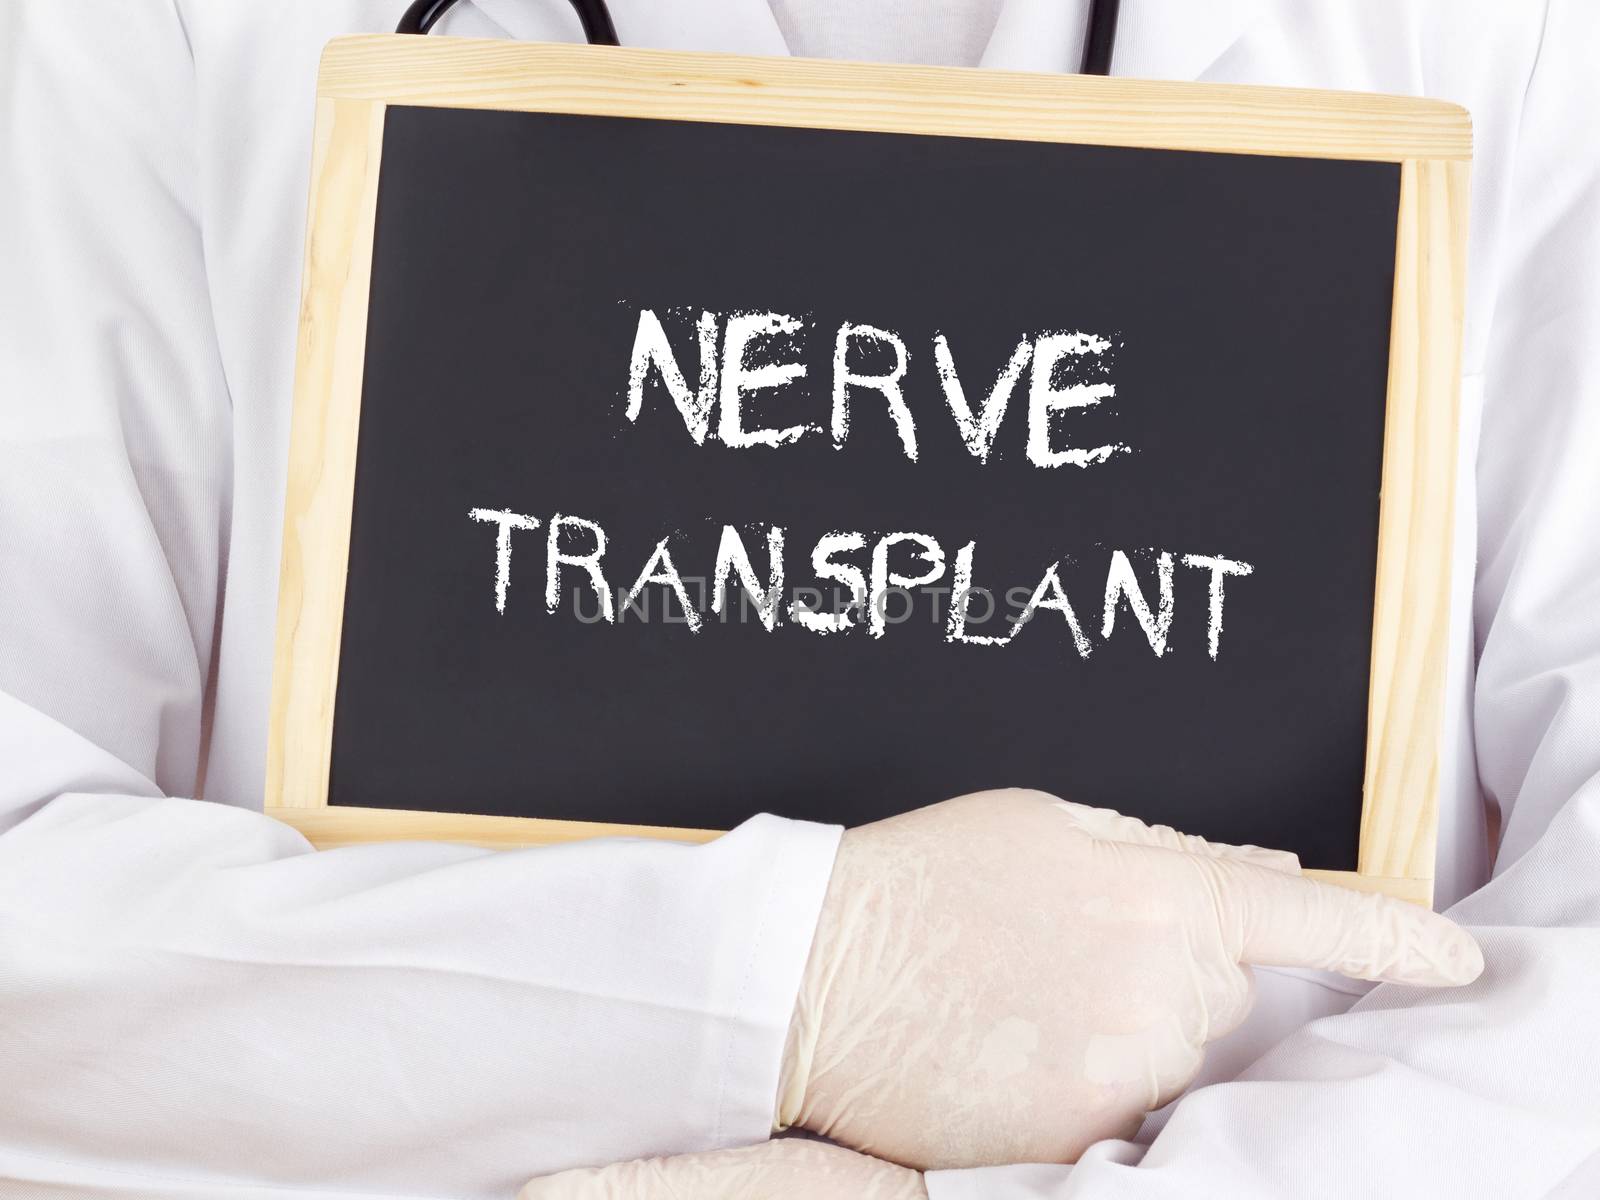 Doctor shows information: nerve transplant by gwolters